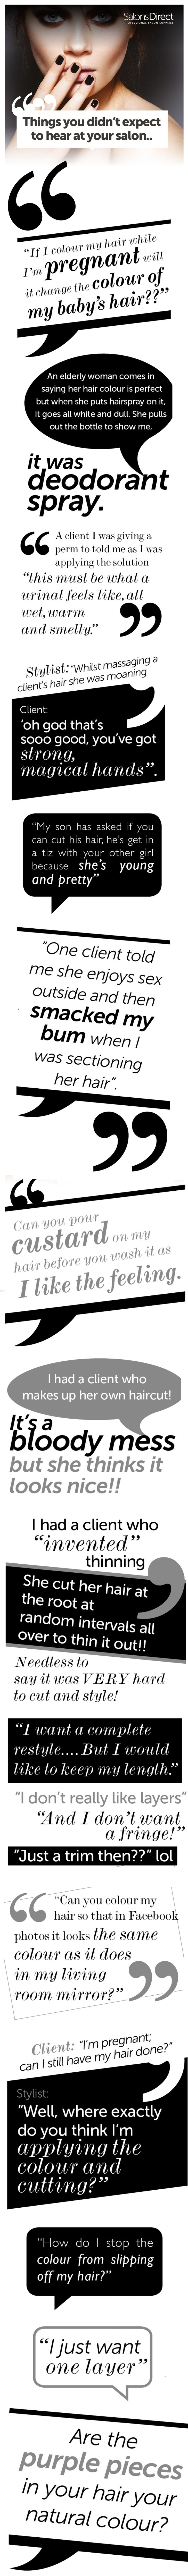 Things you don't expect to hear at your salon